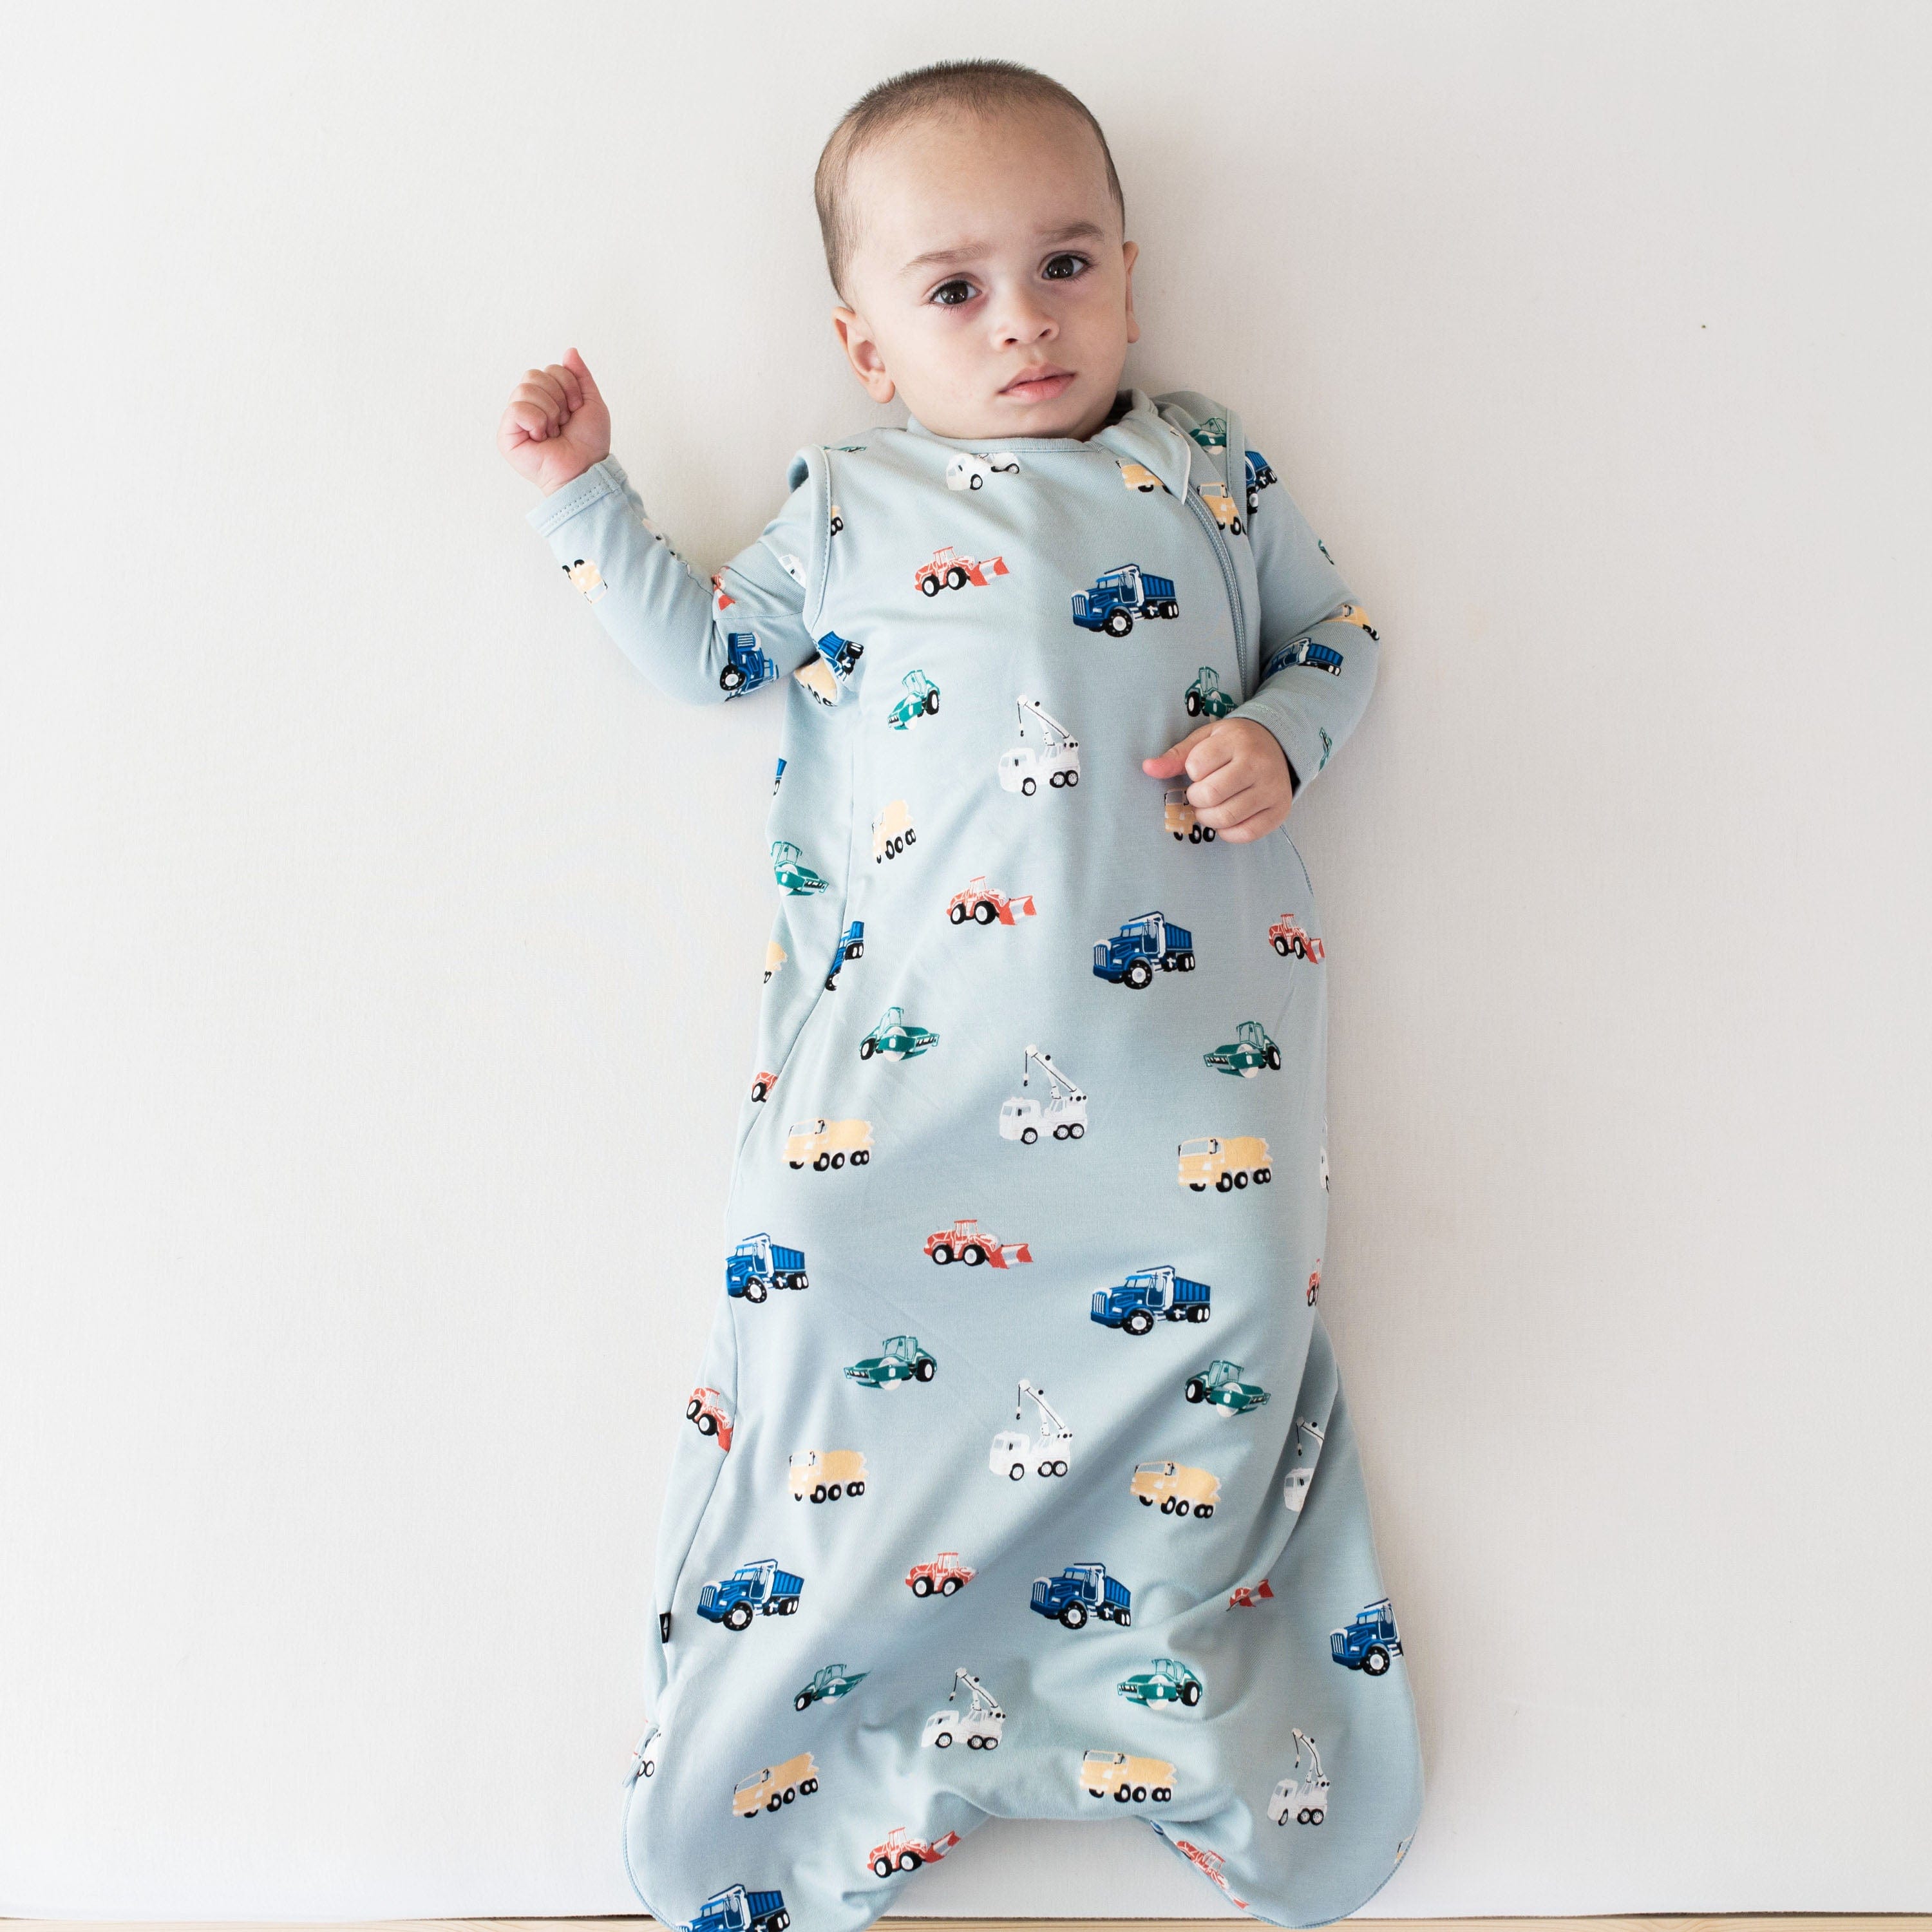 Infant wearing Kyte Baby Sleep Bag in Construction 0.5